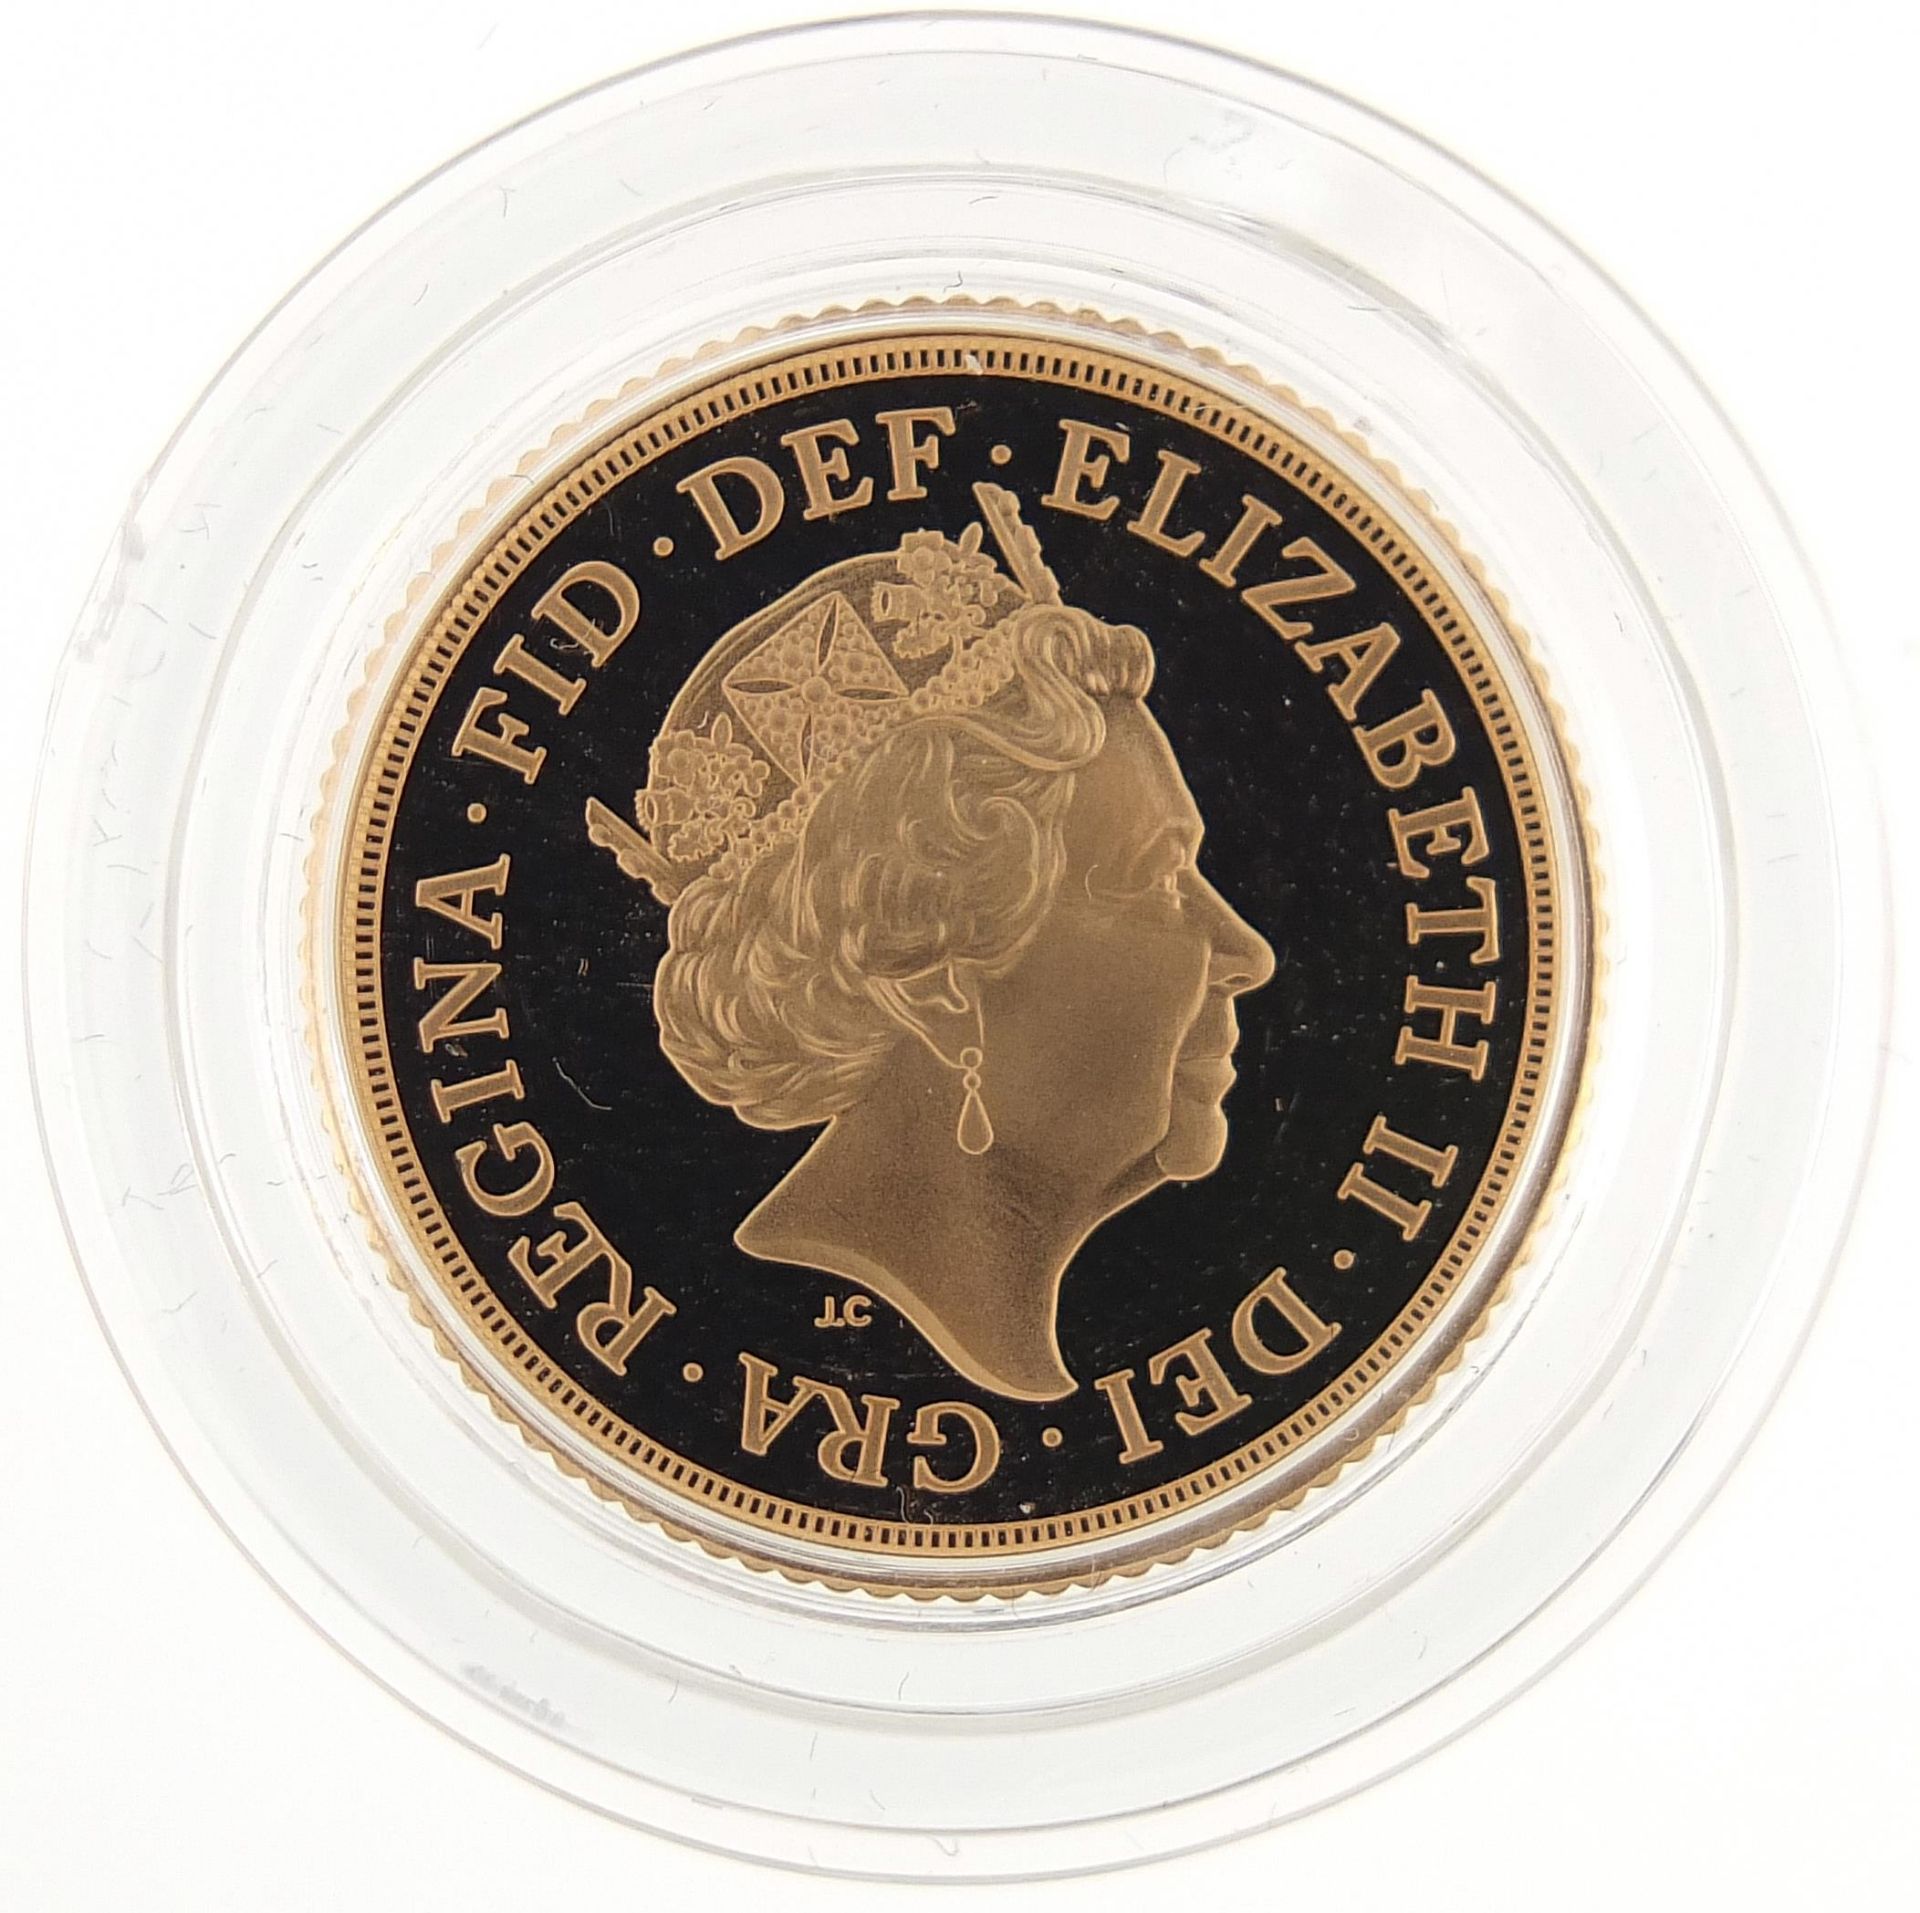 Elizabeth II 2021 gold proof sovereign with box and certificate, 6767/7995 - this lot is sold - Image 3 of 4